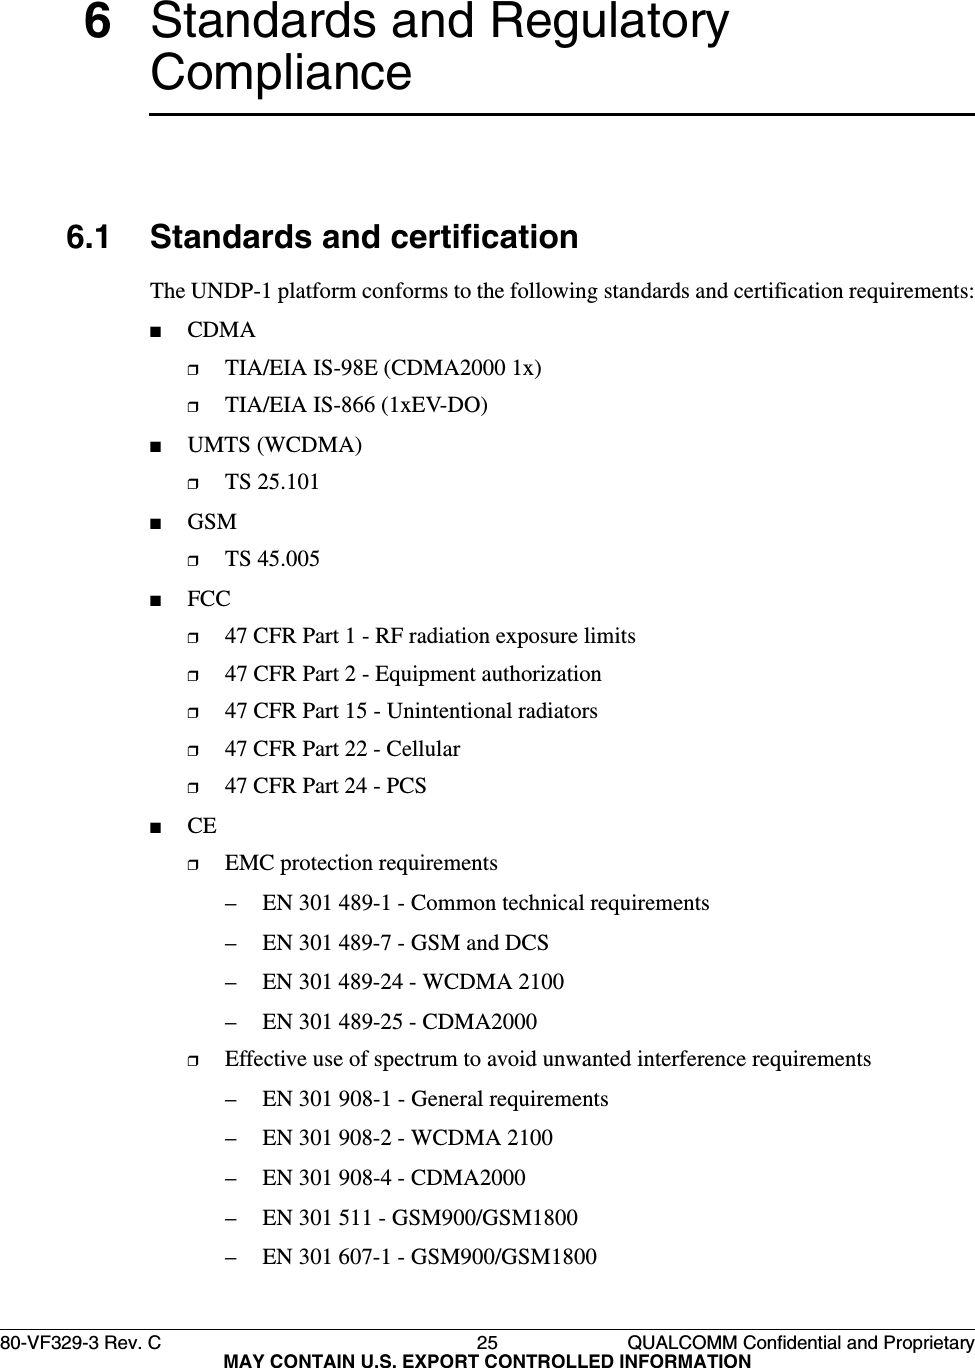 80-VF329-3 Rev. C 25 QUALCOMM Confidential and ProprietaryMAY CONTAIN U.S. EXPORT CONTROLLED INFORMATION6Standards and Regulatory Compliance6.1 Standards and certificationThe UNDP-1 platform conforms to the following standards and certification requirements:■CDMA❒TIA/EIA IS-98E (CDMA2000 1x)❒TIA/EIA IS-866 (1xEV-DO)■UMTS (WCDMA)❒TS 25.101■GSM❒TS 45.005■FCC❒47 CFR Part 1 - RF radiation exposure limits❒47 CFR Part 2 - Equipment authorization❒47 CFR Part 15 - Unintentional radiators❒47 CFR Part 22 - Cellular❒47 CFR Part 24 - PCS■CE❒EMC protection requirements– EN 301 489-1 - Common technical requirements– EN 301 489-7 - GSM and DCS– EN 301 489-24 - WCDMA 2100– EN 301 489-25 - CDMA2000❒Effective use of spectrum to avoid unwanted interference requirements– EN 301 908-1 - General requirements– EN 301 908-2 - WCDMA 2100– EN 301 908-4 - CDMA2000– EN 301 511 - GSM900/GSM1800– EN 301 607-1 - GSM900/GSM1800